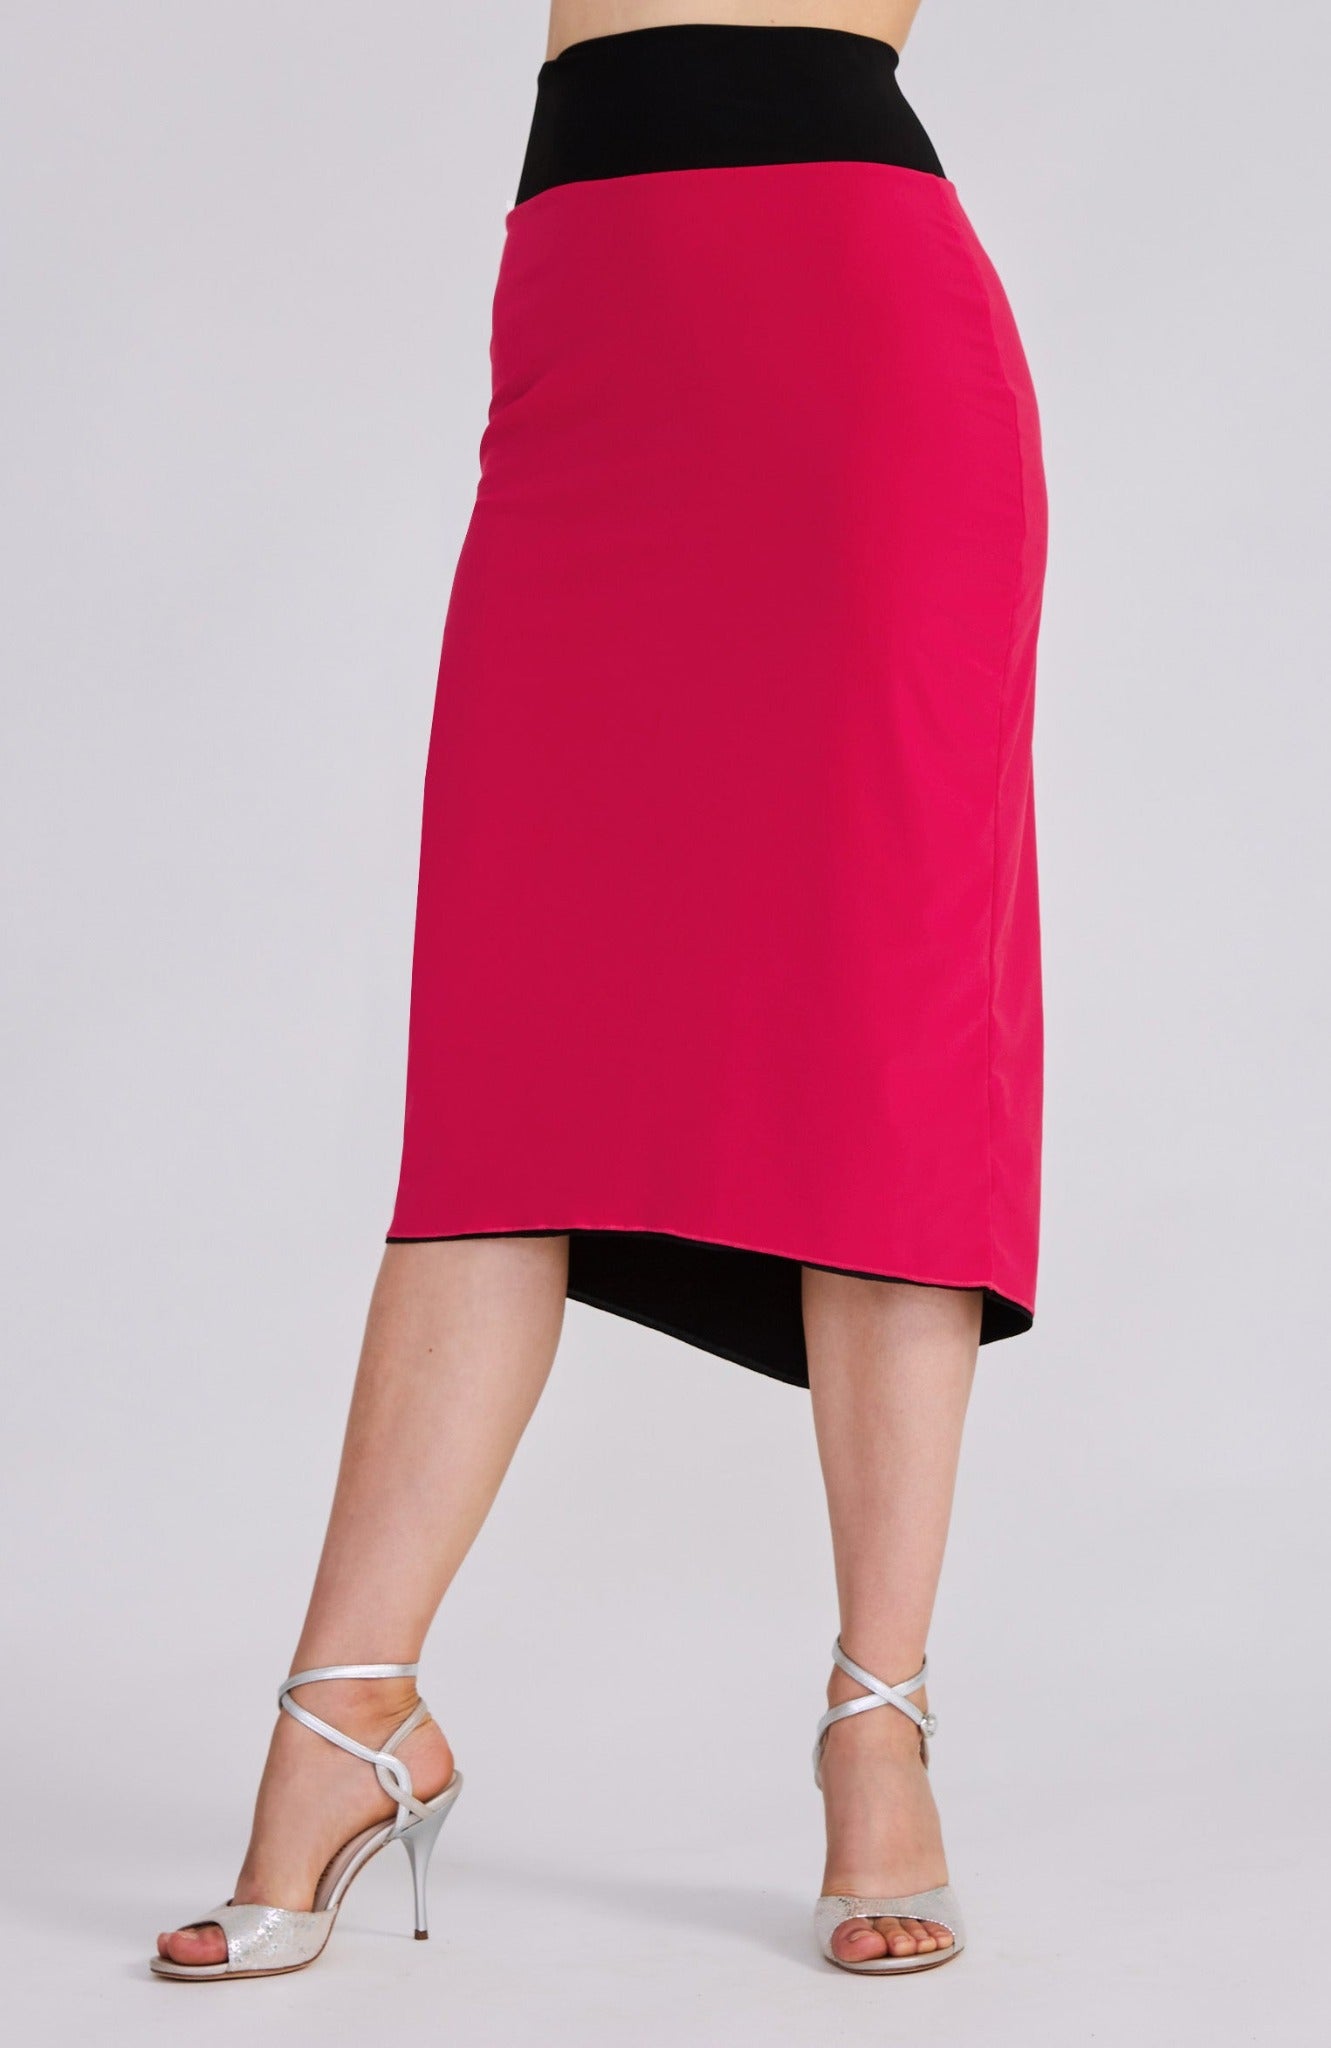 tango skirt in pink with back slit